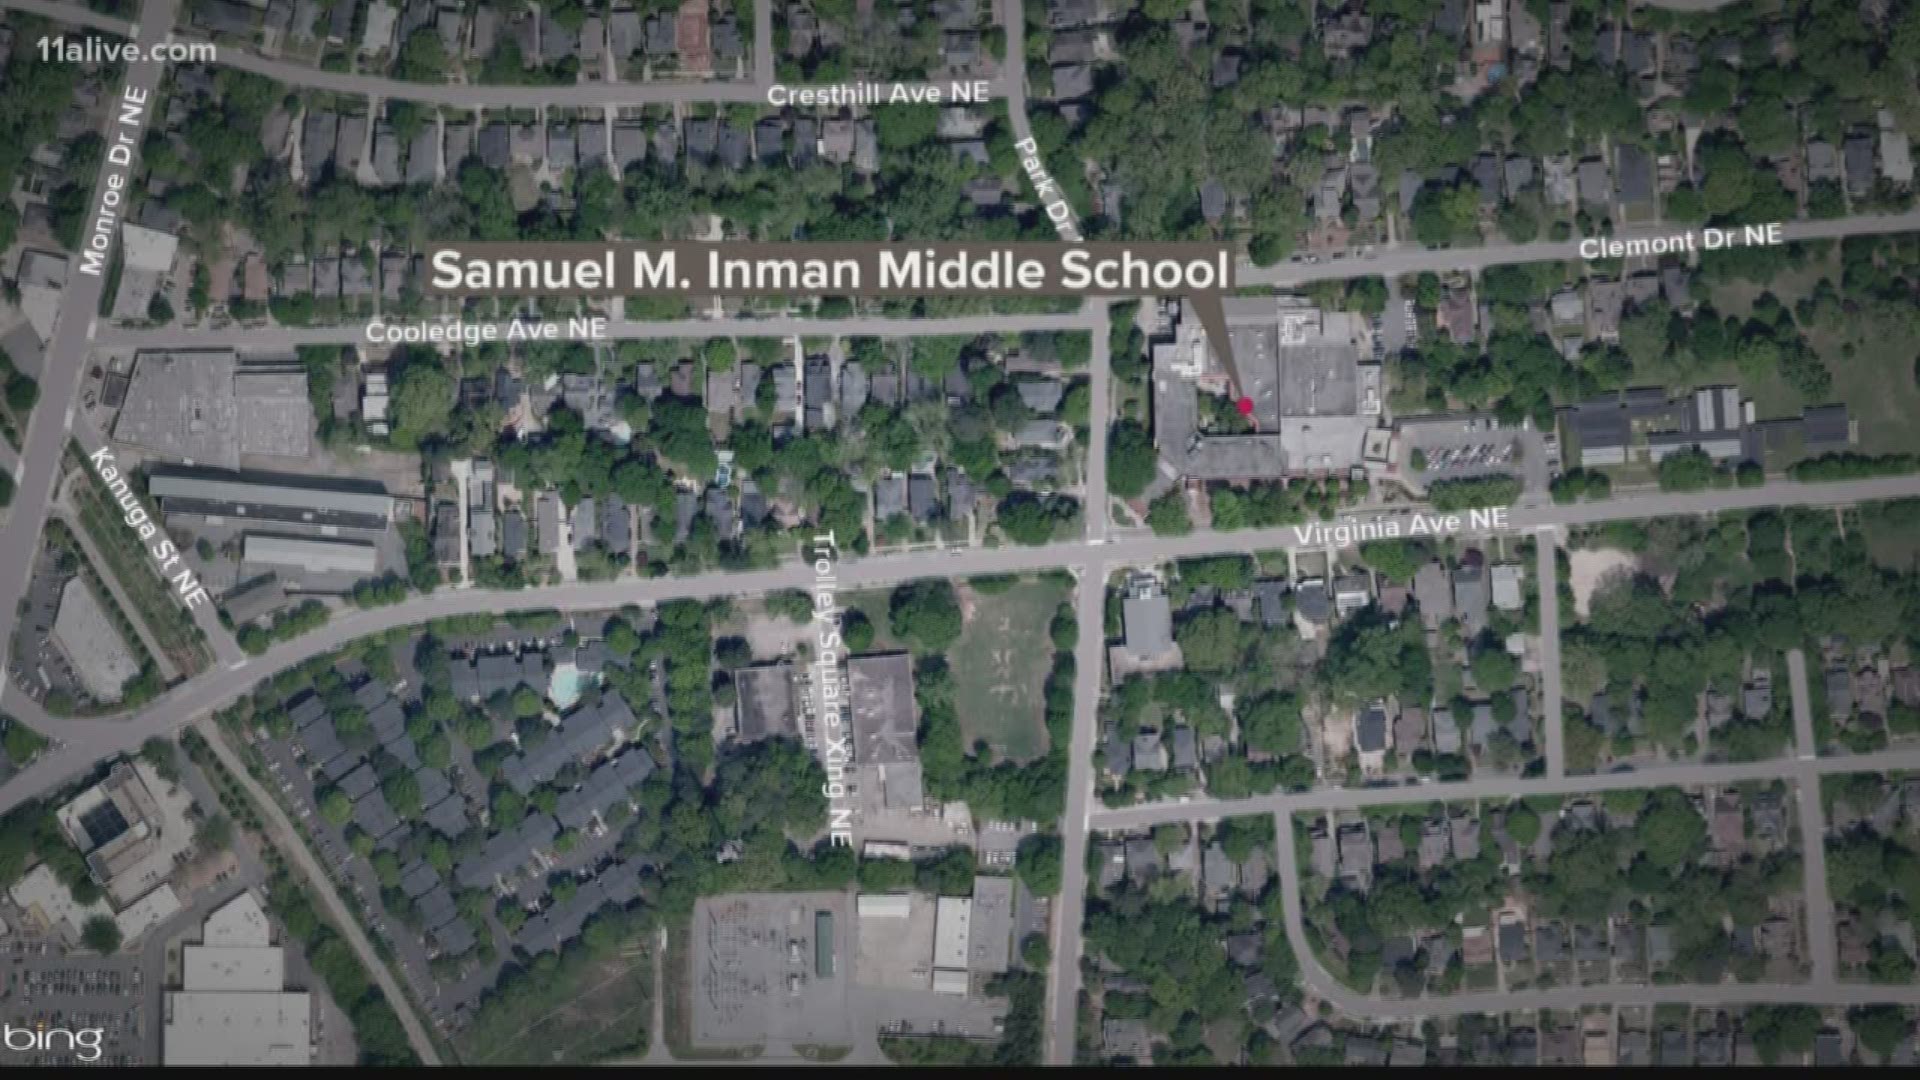 Four middle-schoolers were robbed at gunpoint on Friday as they were heading back to Inman Middle School.